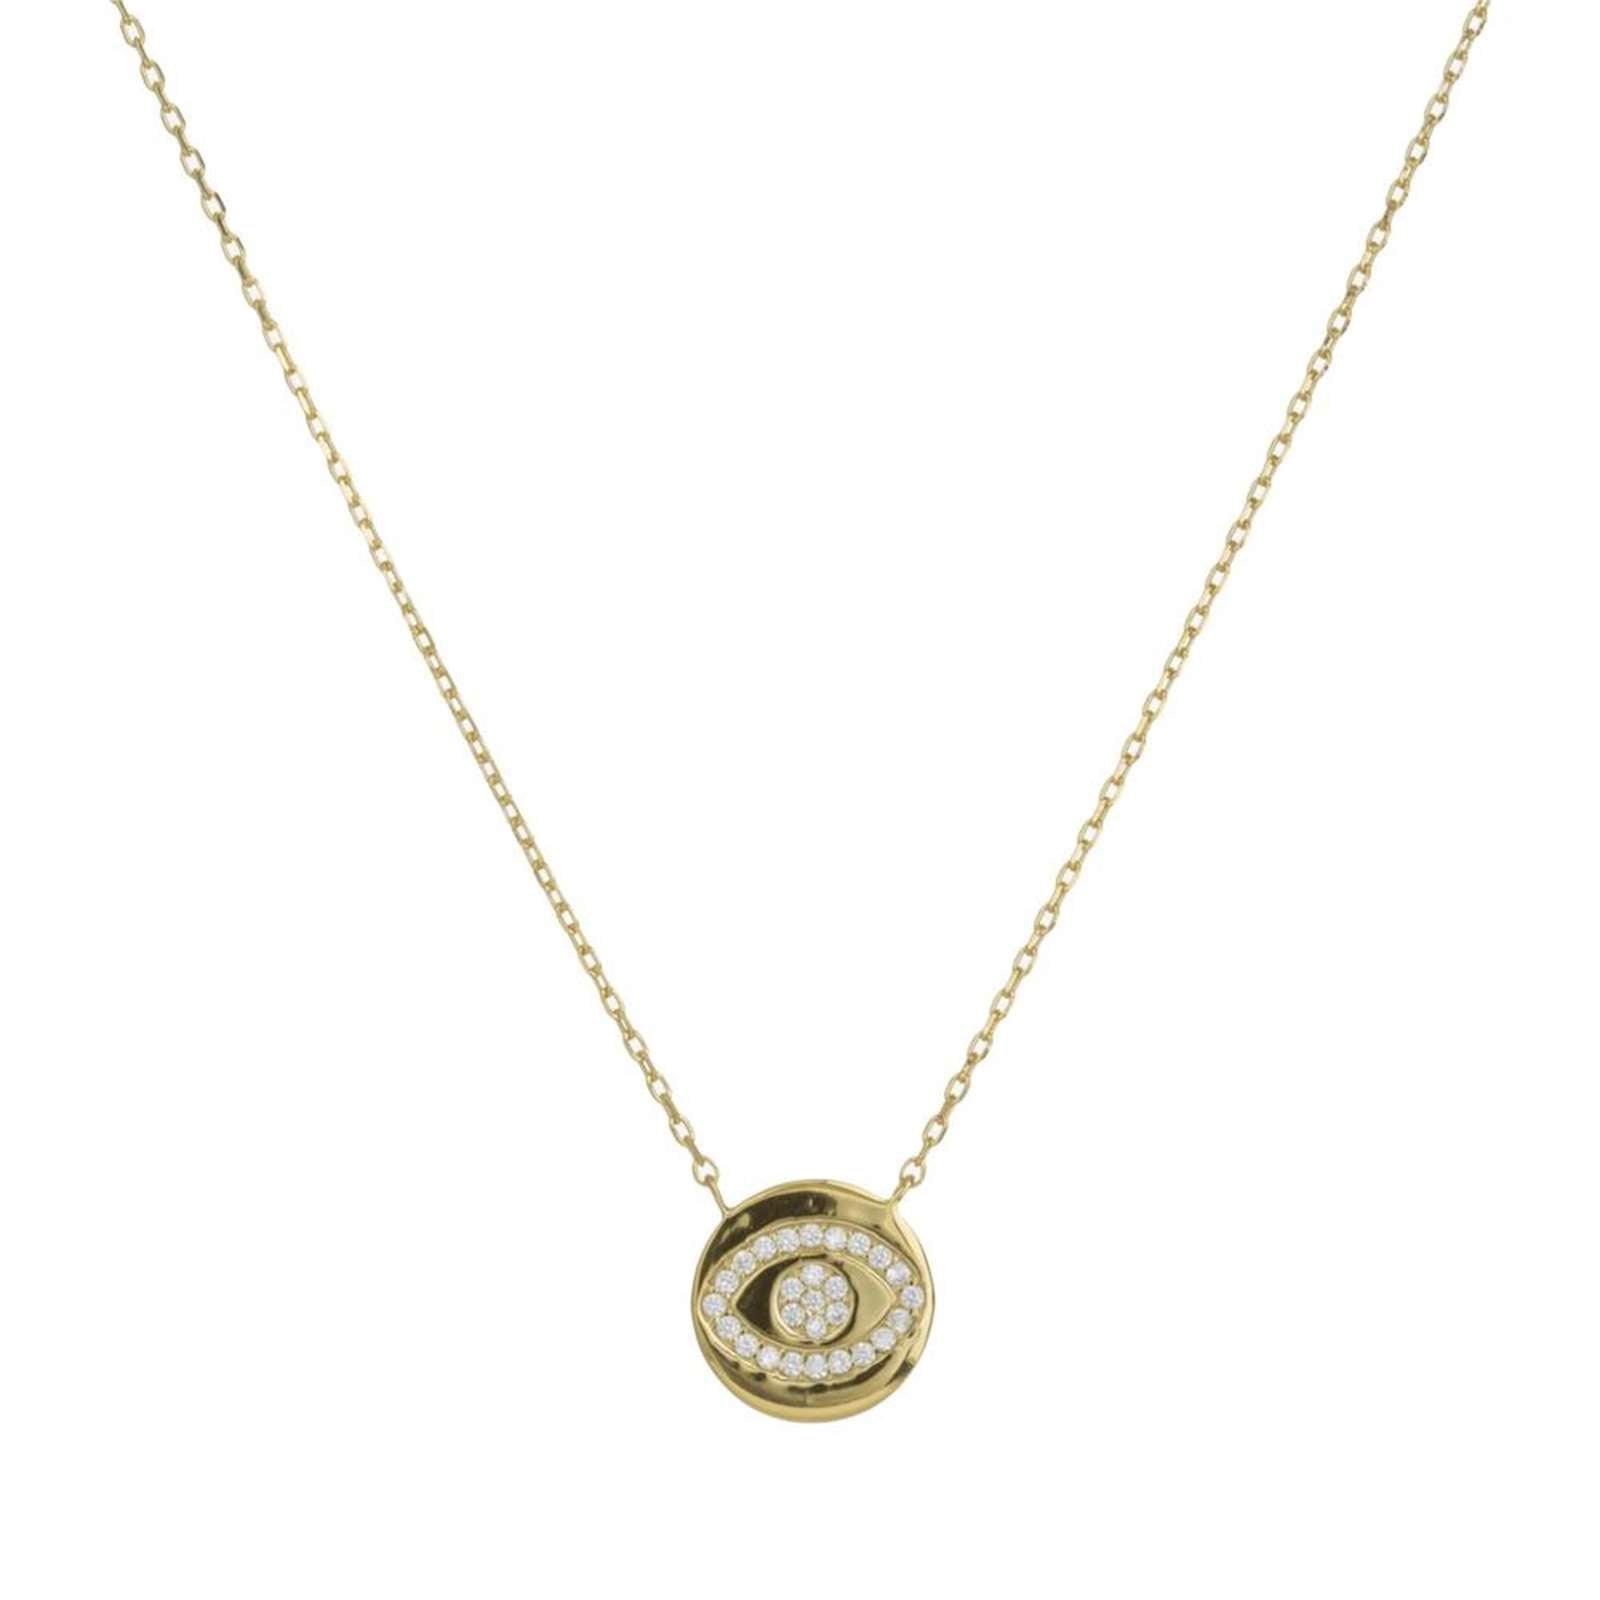 Athra Women Round Guardian Eye Necklace With Extension